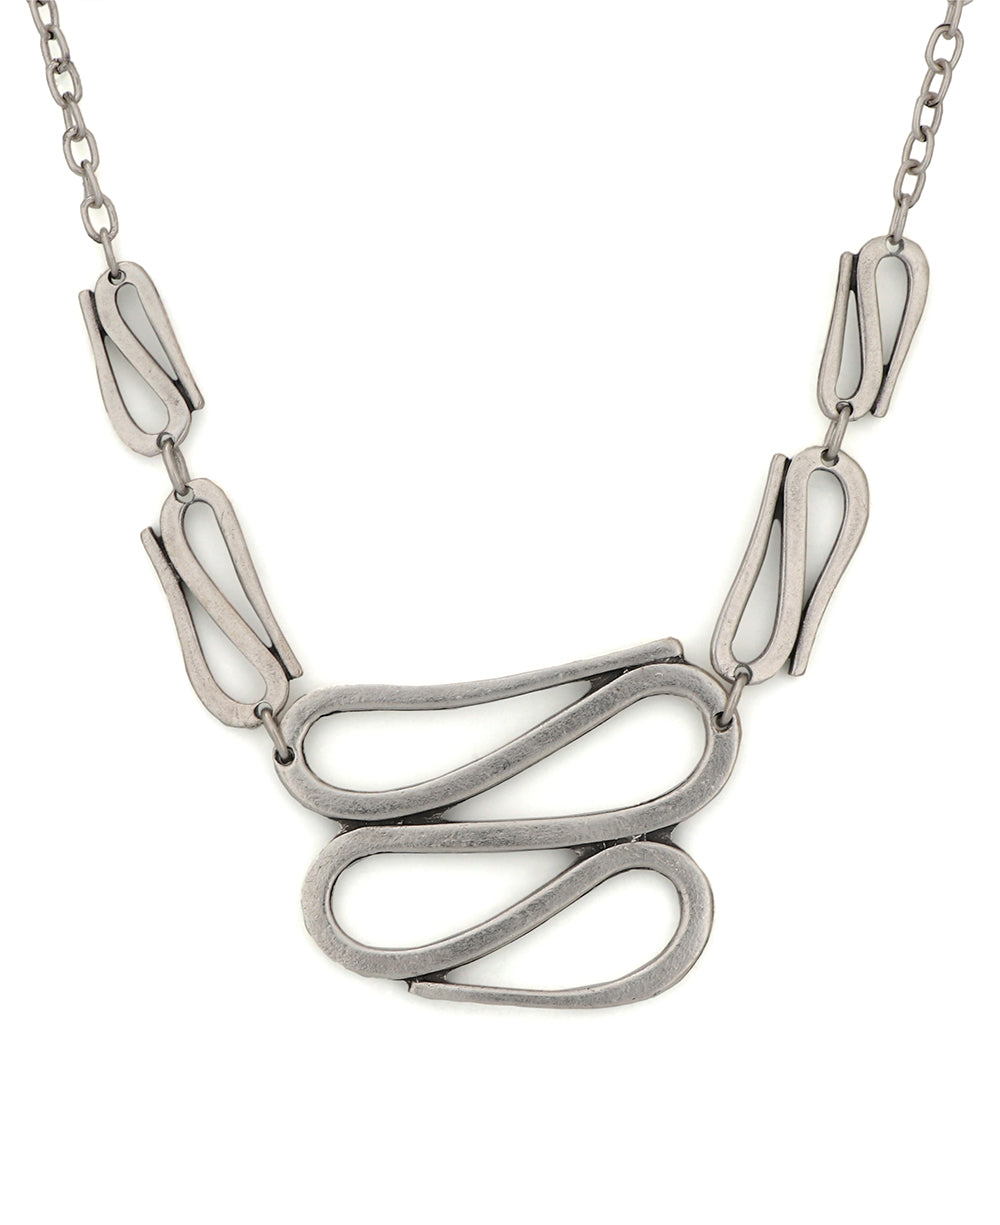 Swirly S-shaped necklace